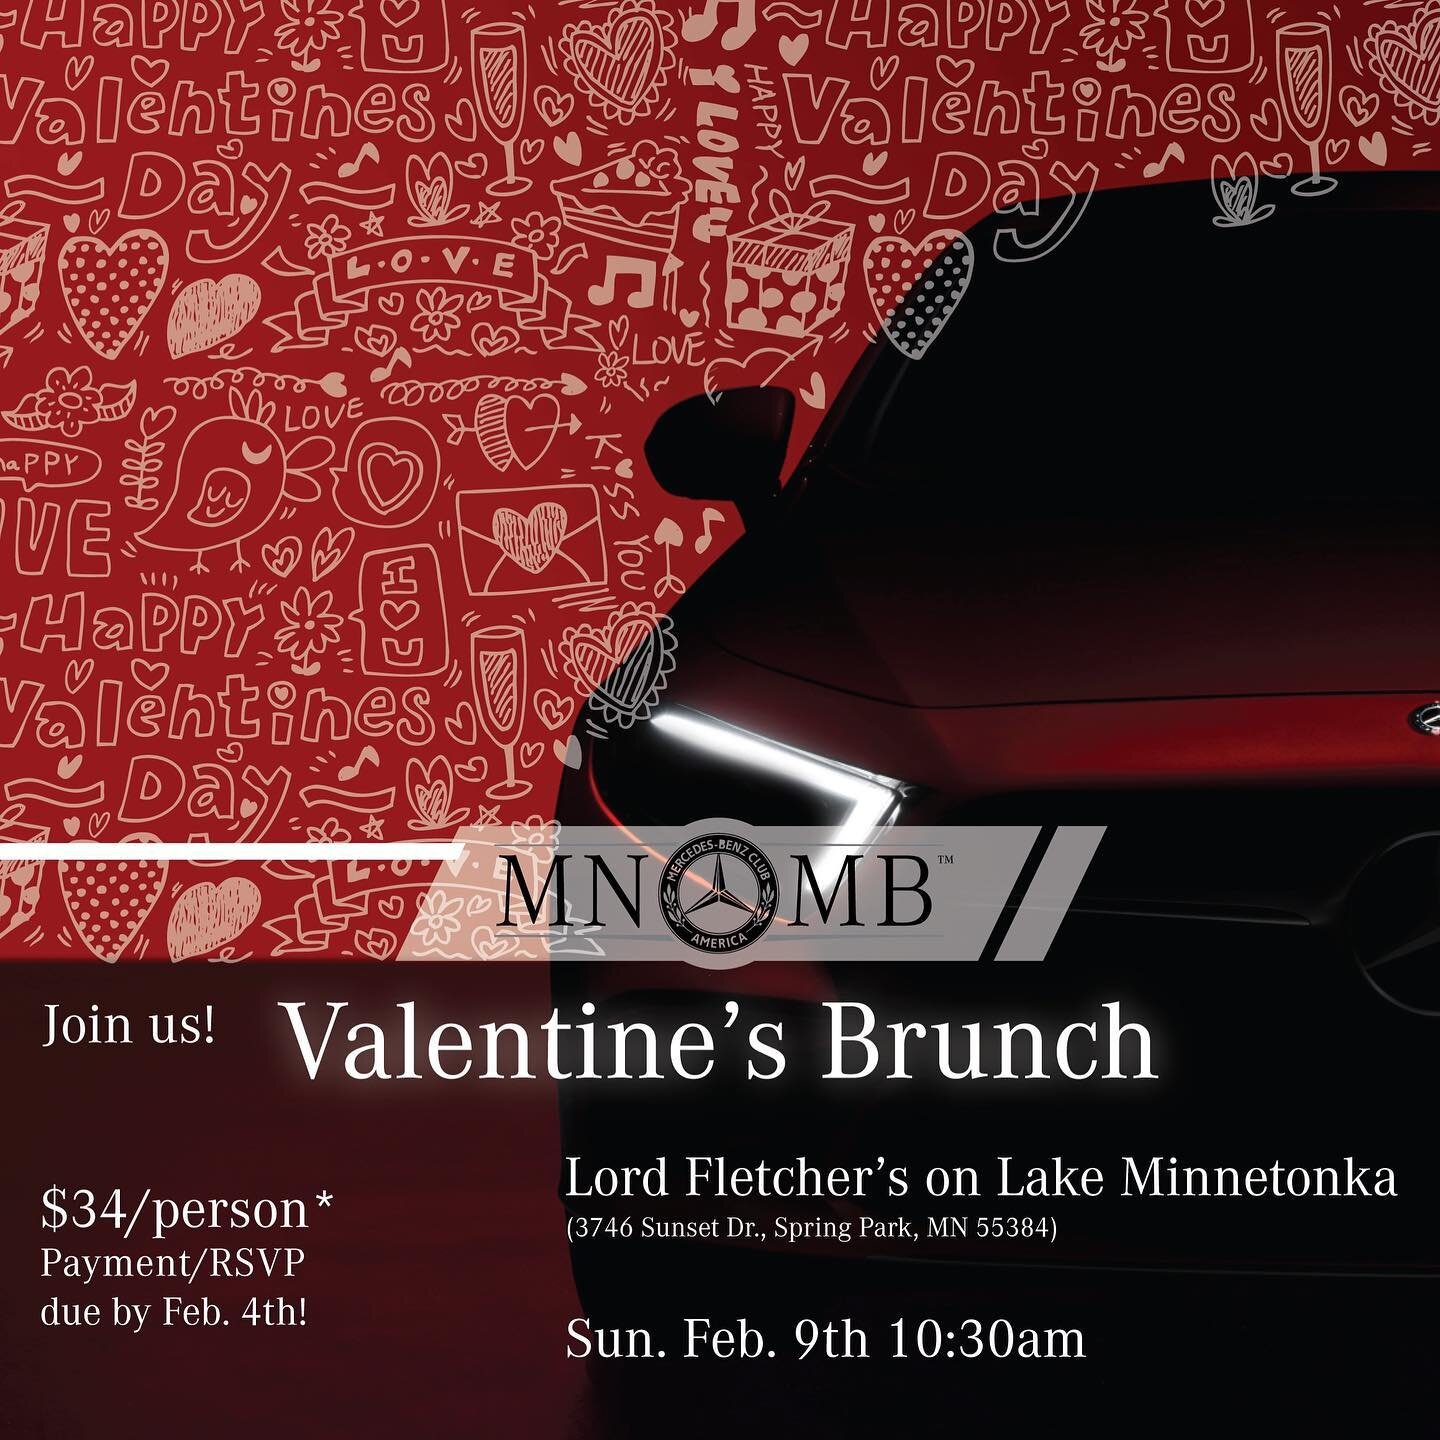 Here&rsquo;s the next big event friends! Members-only. Find us on @facebook.
.
#mercedesbenz #mercedes #benz #mbca #amg #luxury #sport #minnesota #mn #minneapolis #twincities #cars #carclub #club